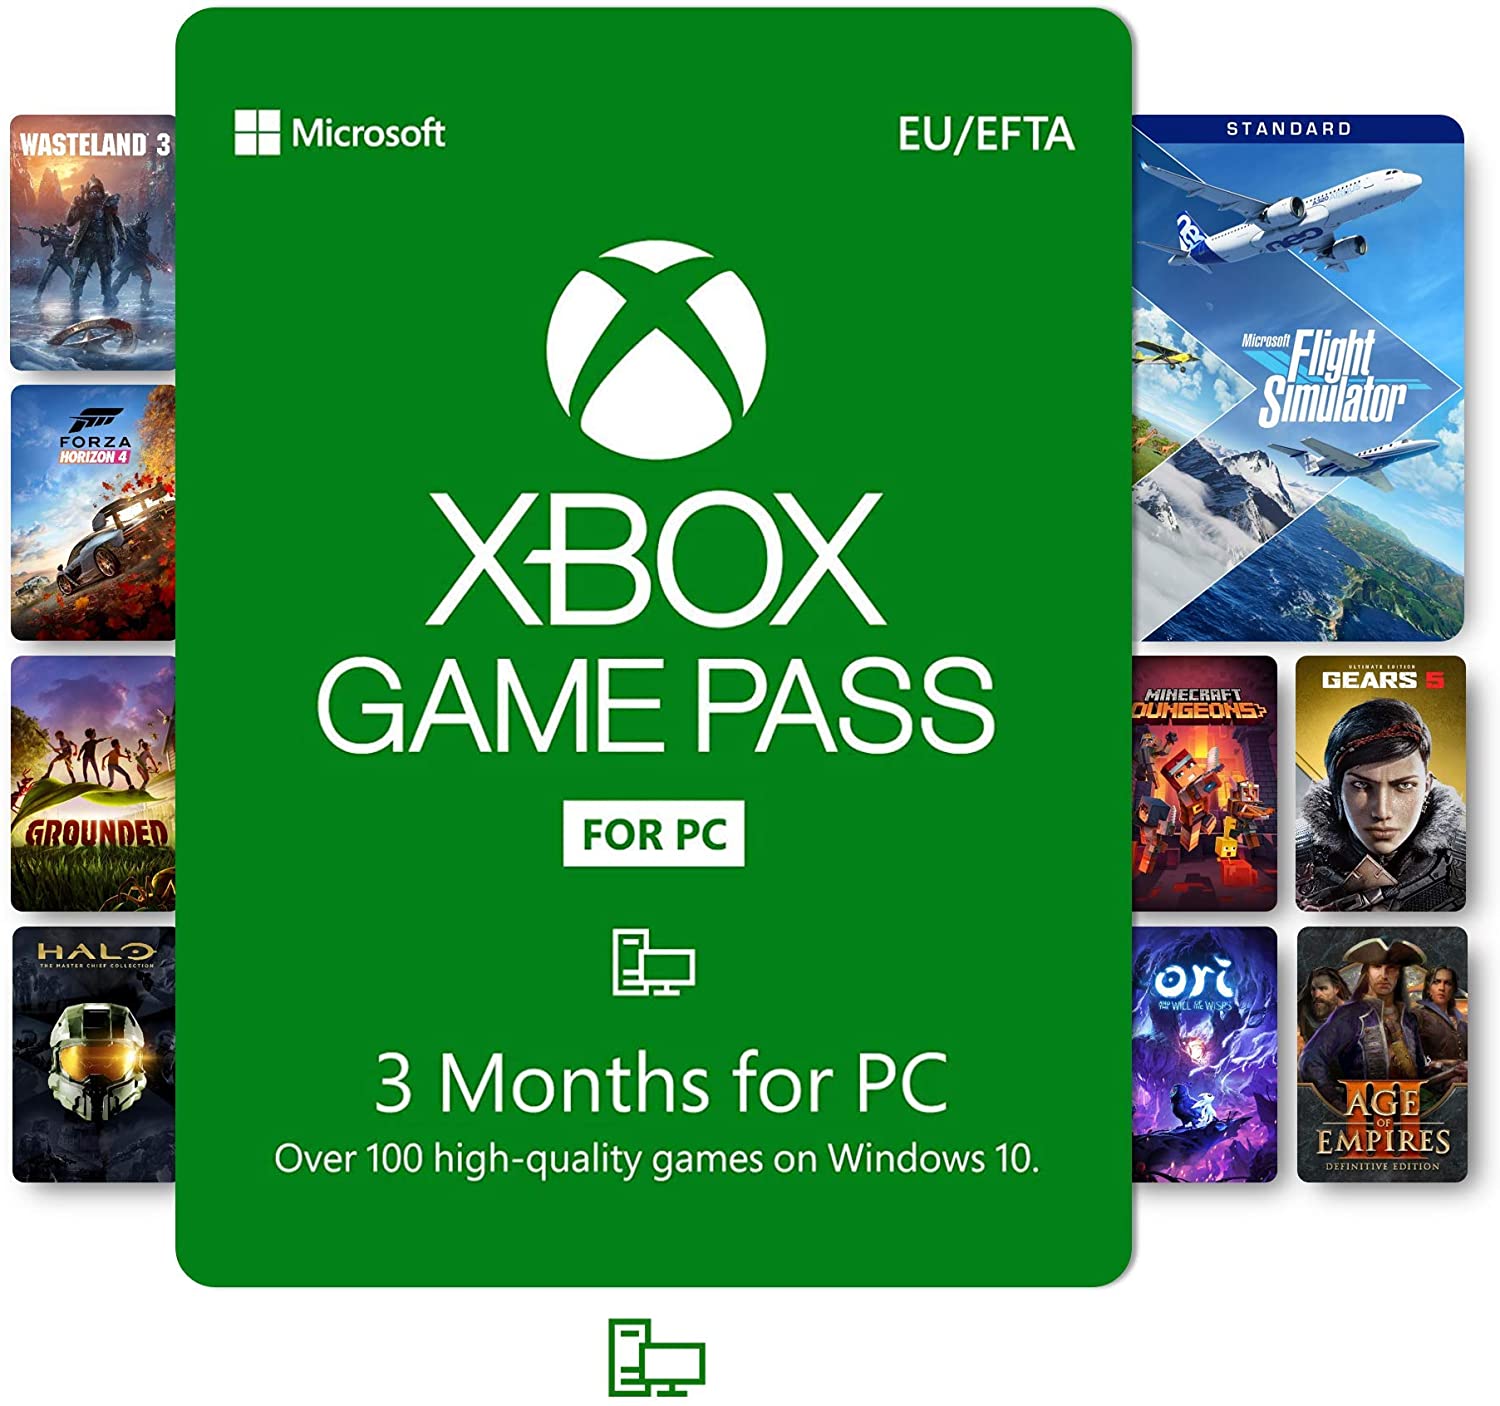 Xbox Game Pass 3 Month Key (for PC): Full Code (Europe)